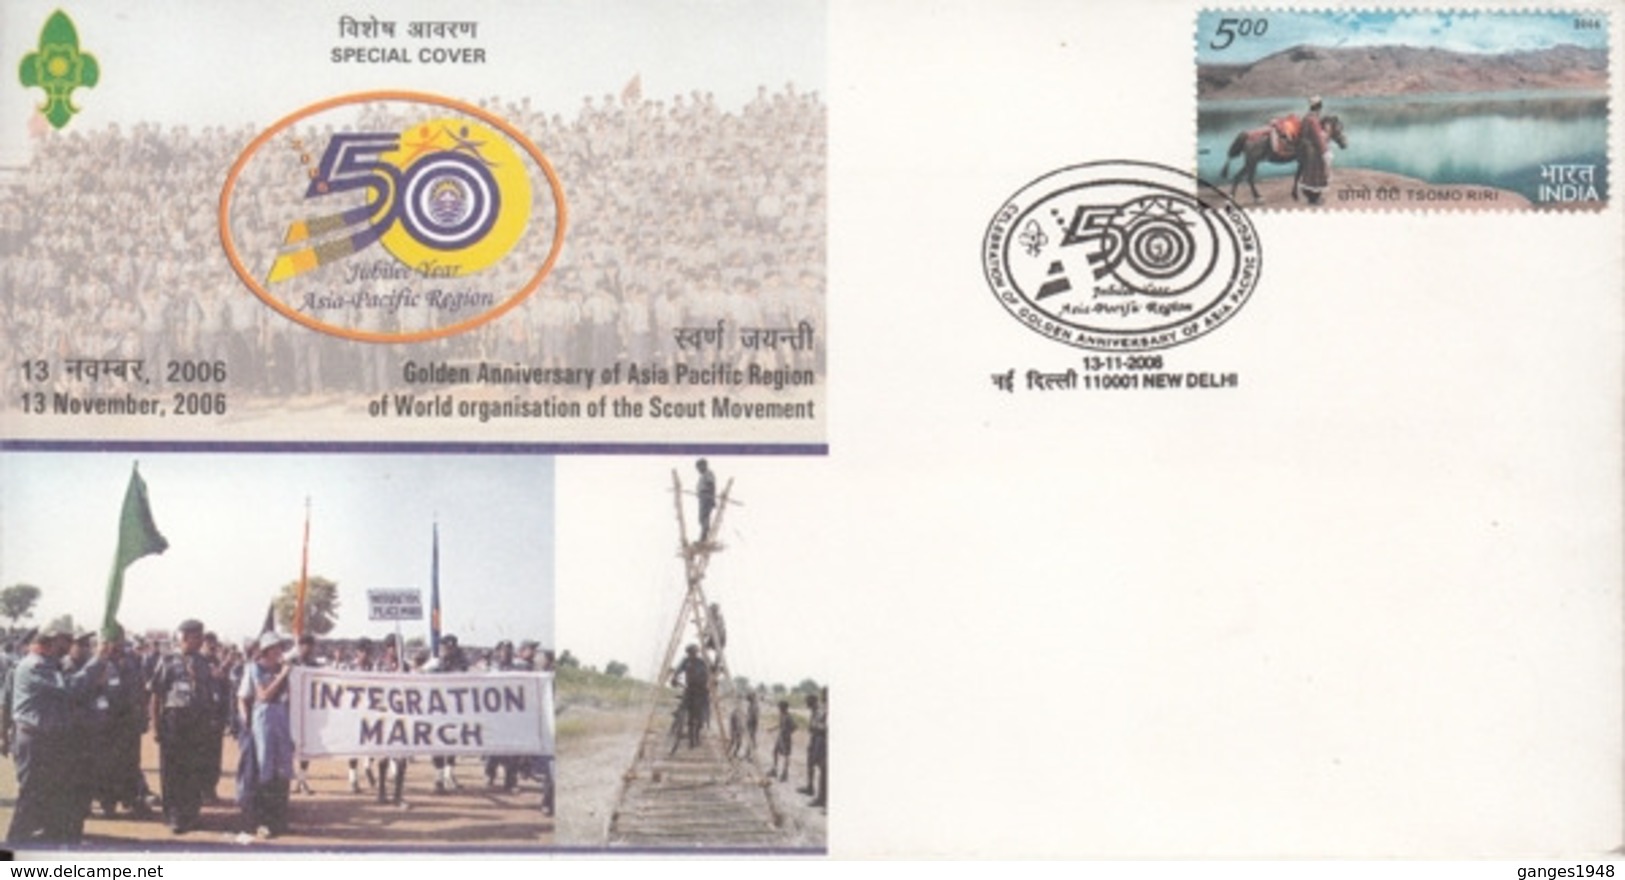 India  2006  Scouting  Golden Jubilee Year  Asia - Pacific Region  Integration March  Special Cover #   22309  D - Covers & Documents